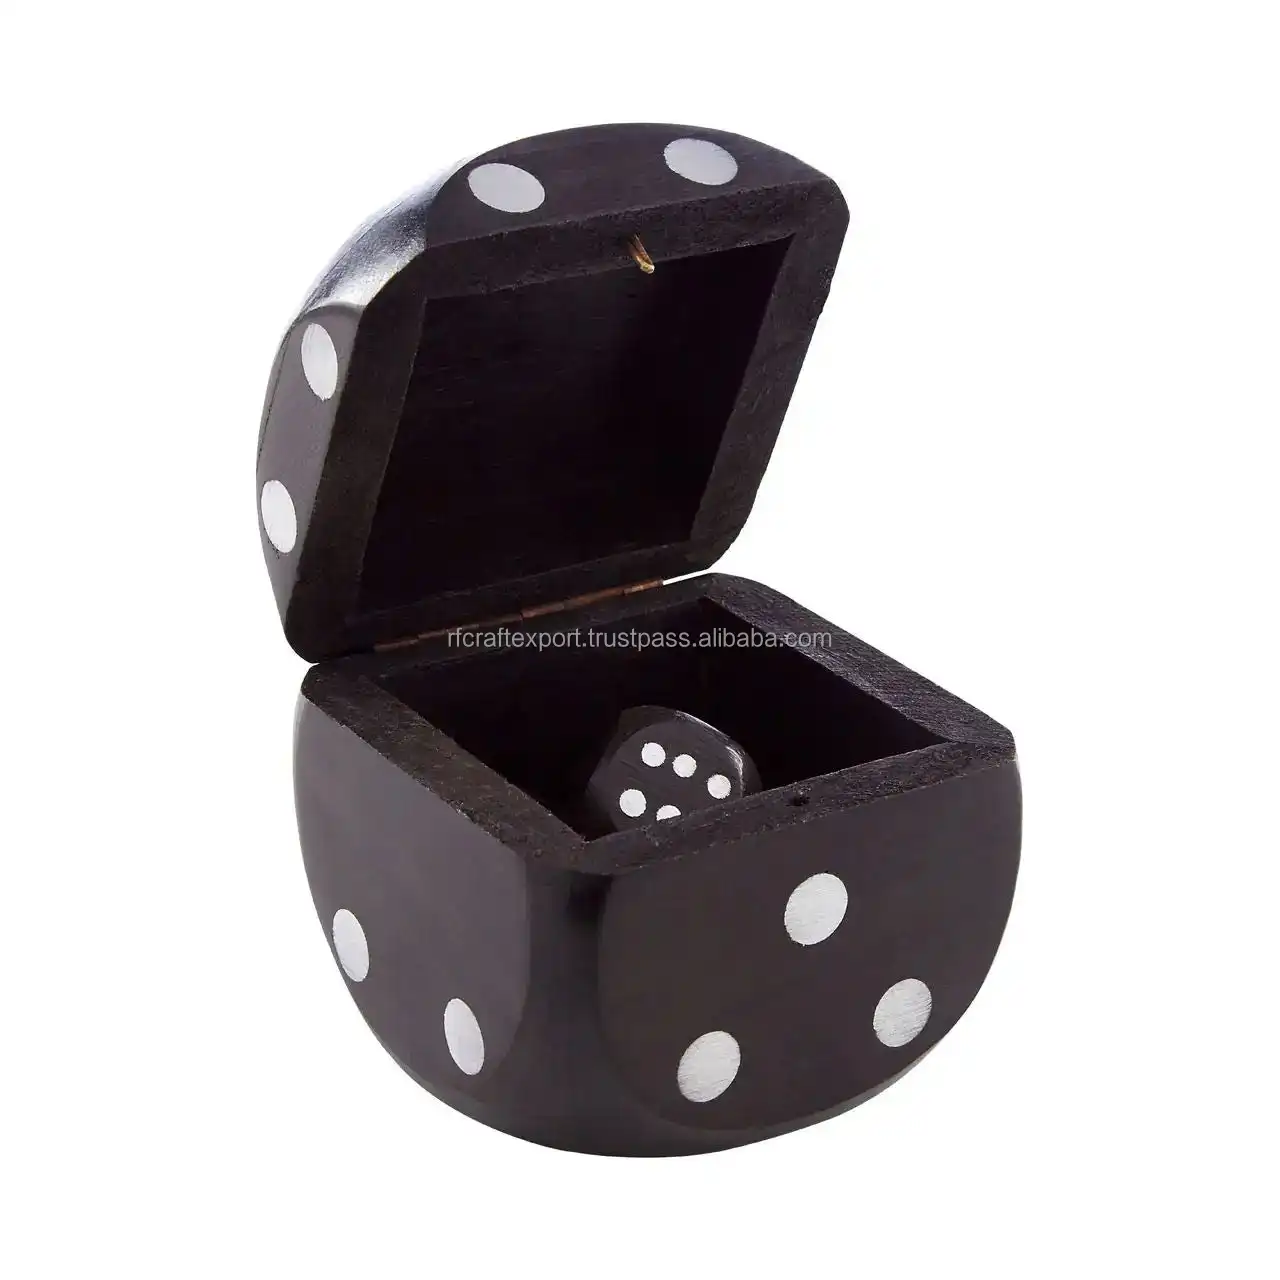 New Arrival Intelligent and Fun Beech Wooden Ludo Game Dice Box Square Design for 24 Months and up Unisex Chess Game